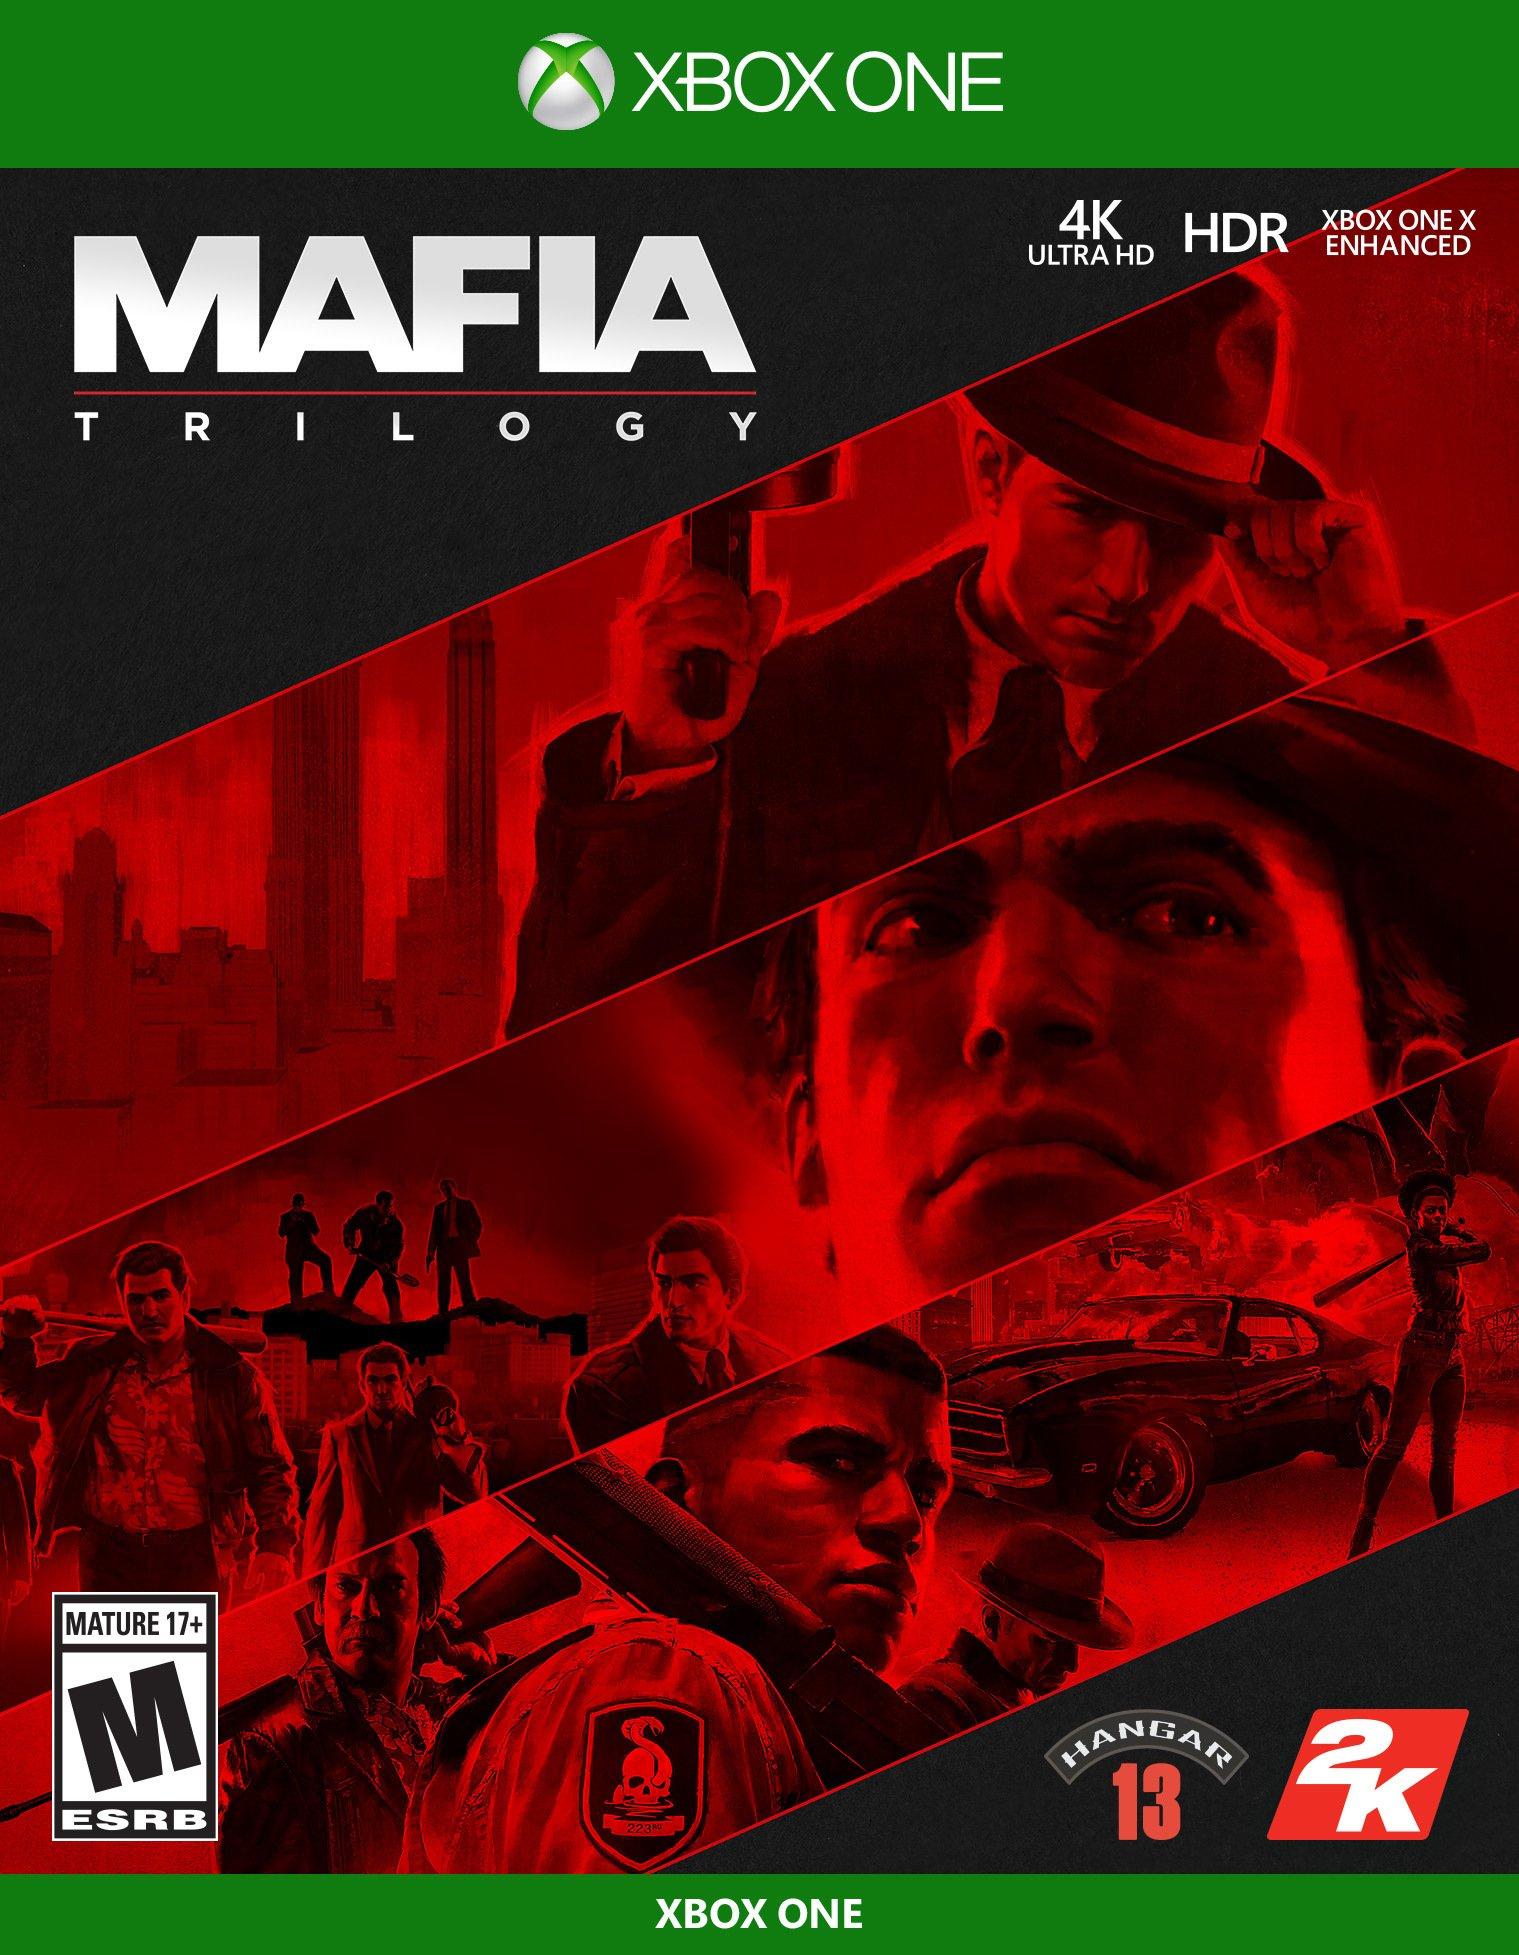 Do I need PlayStation Plus or Xbox Live Gold to play Mafia III? – 2K Support